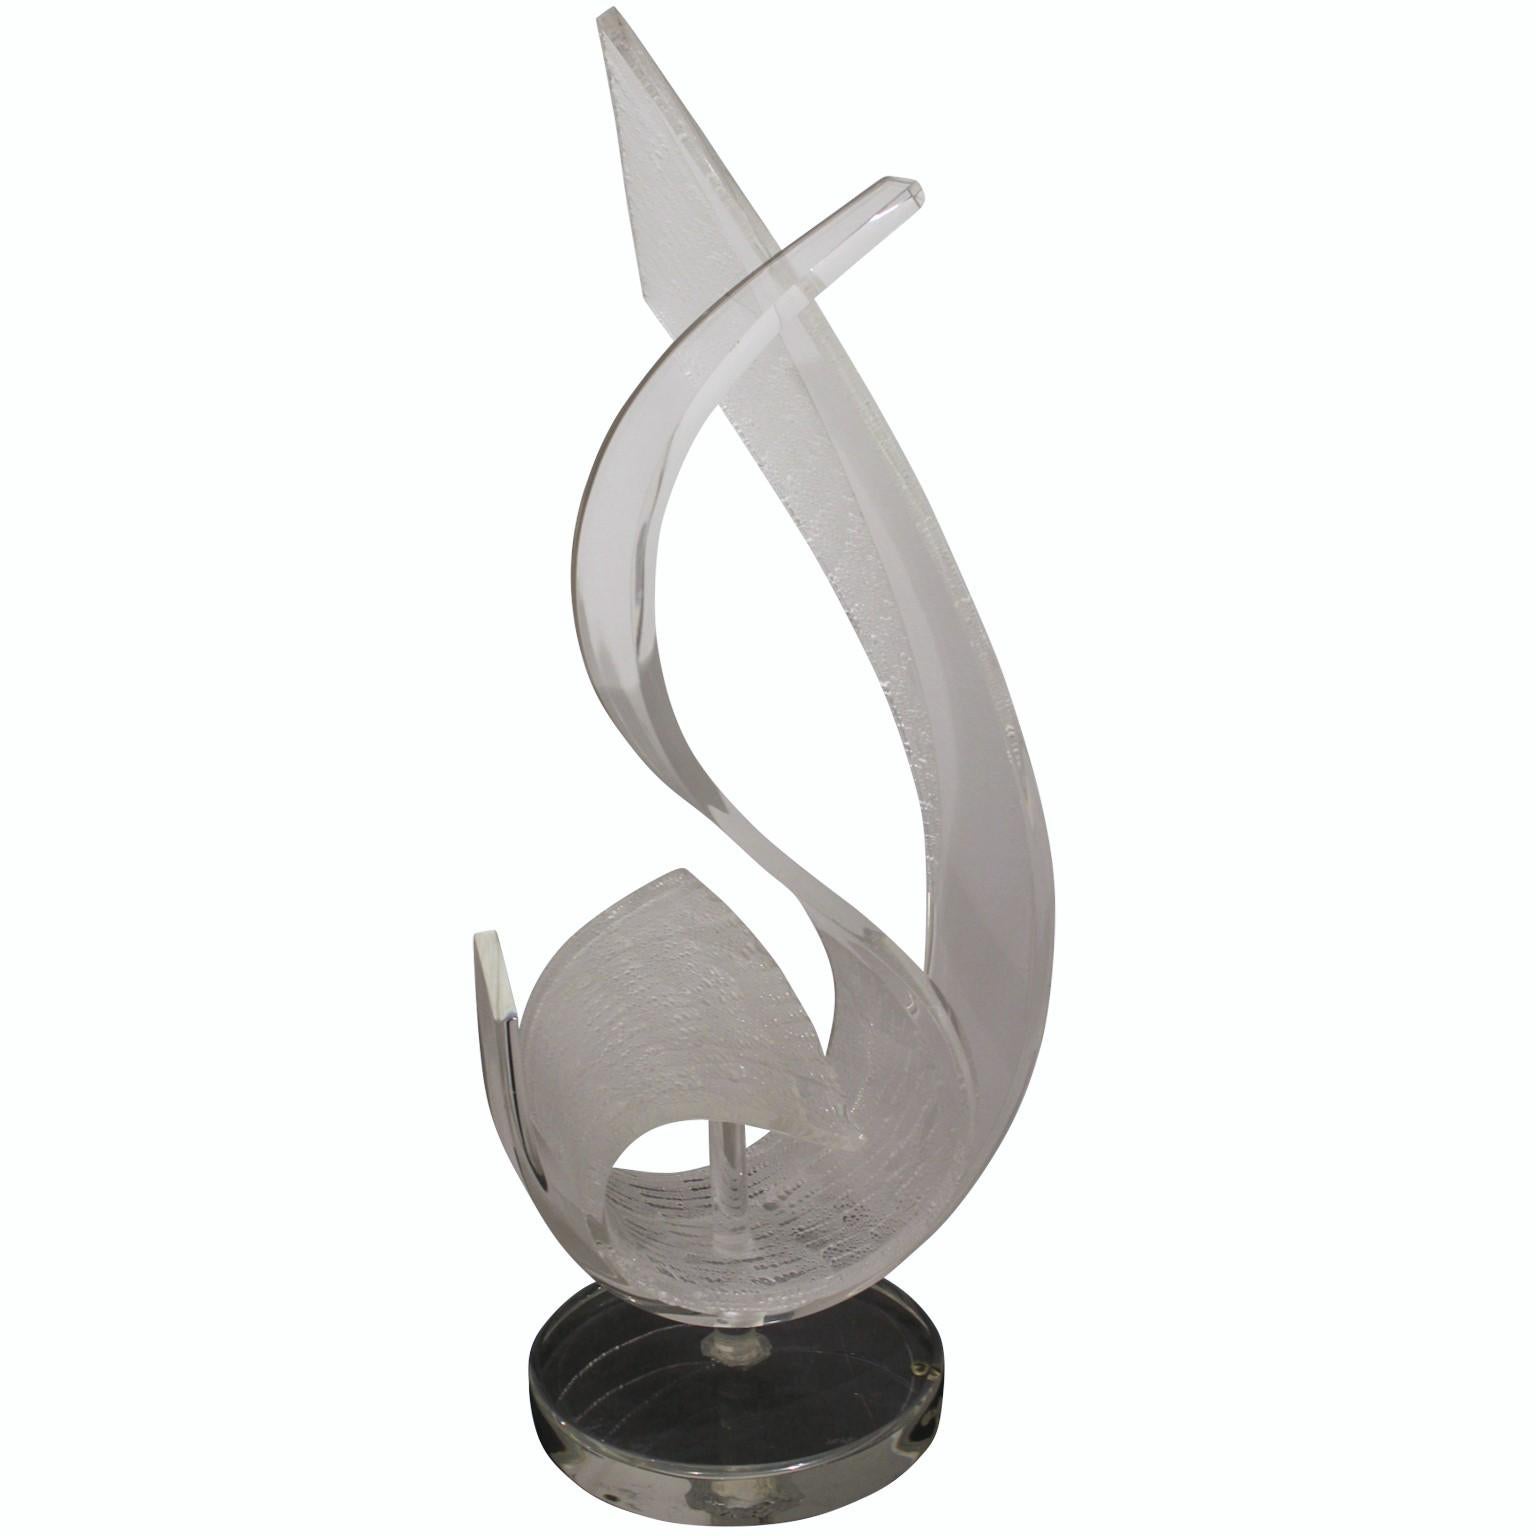 Acrylic Lucite Organic Flowing Sculpture 1